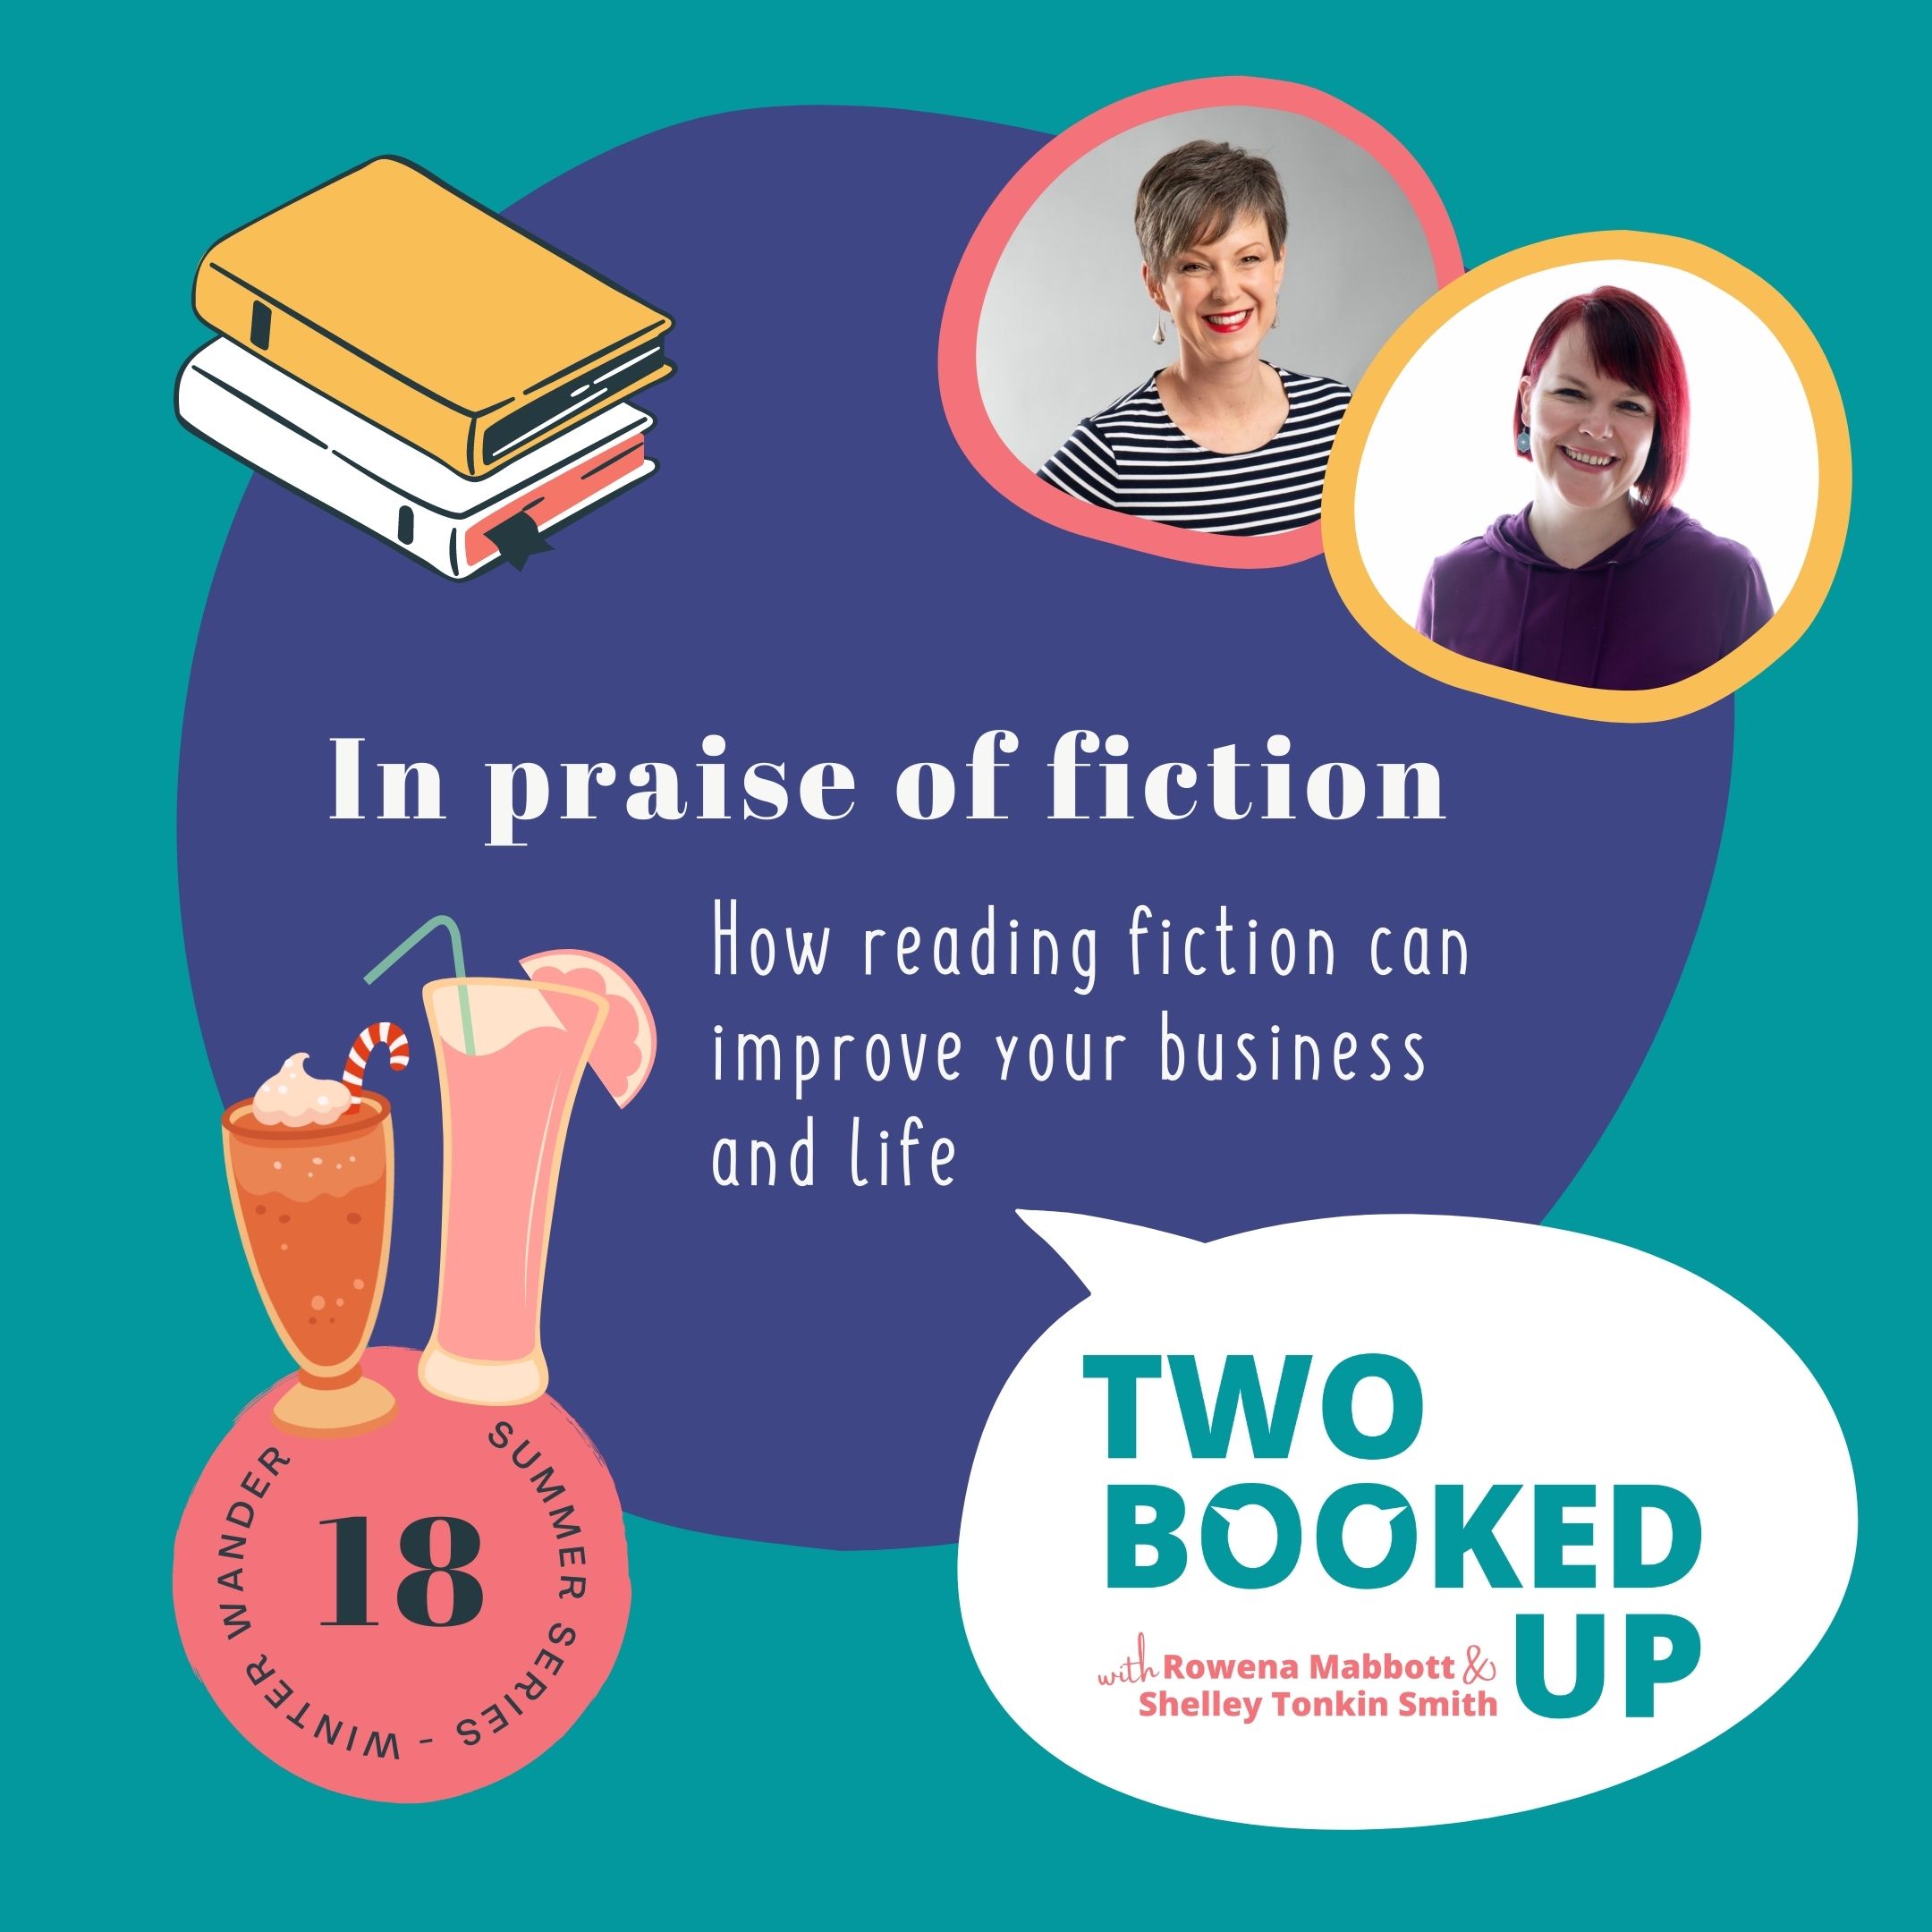 TBU#18 In praise of fiction: How reading fiction can improve your business and life